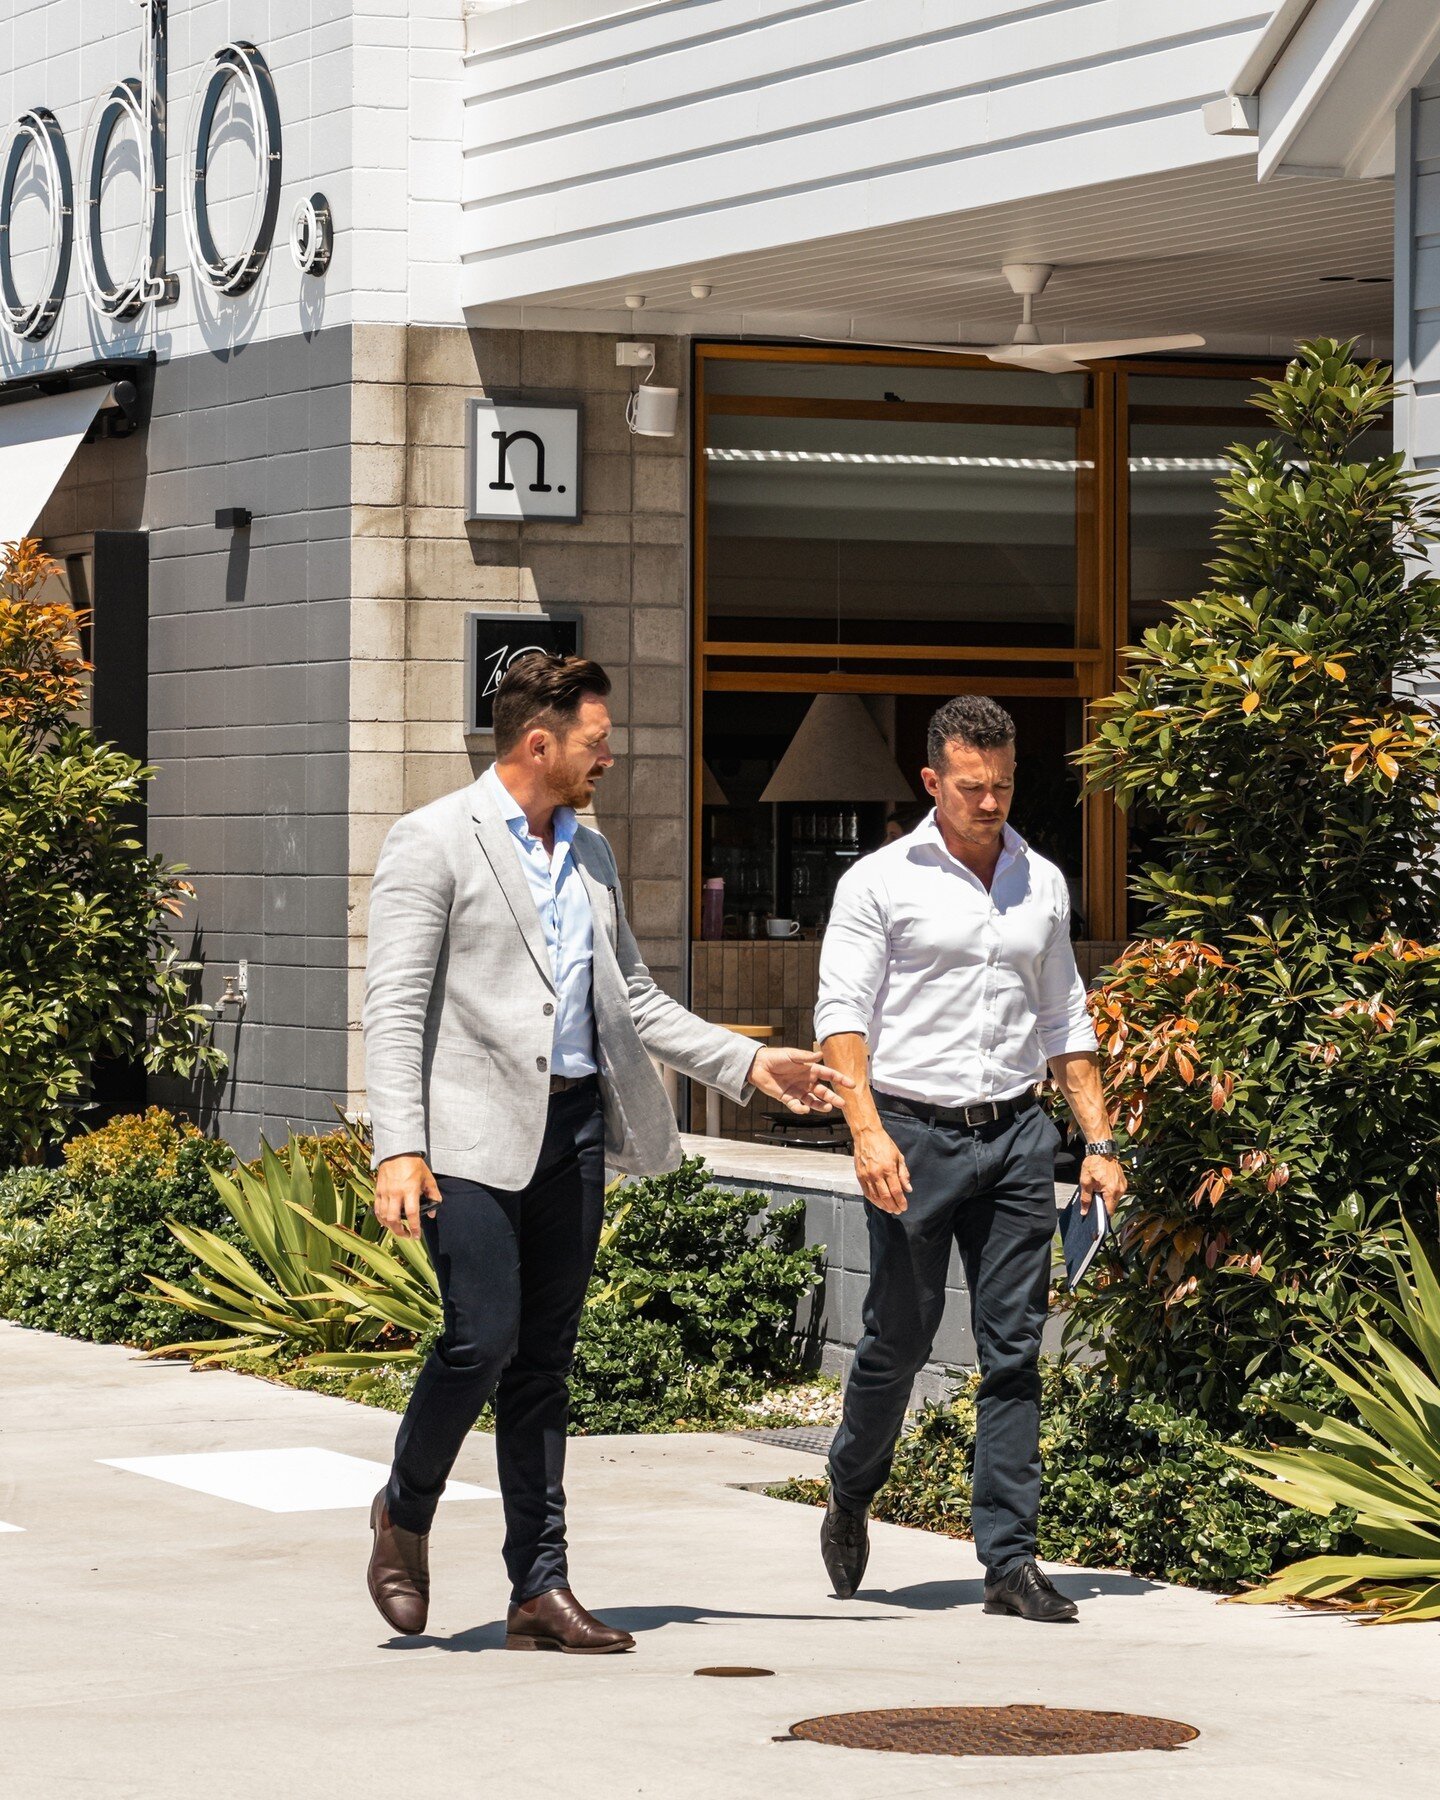 Our deep-rooted experience in the property market, particularly the commercial sector, allows us to offer a fresh approach to investment-grade purchasing and asset management services 🤝

&mdash;&mdash;&mdash;
#brisbaneproperty #brisbanerealestate #b